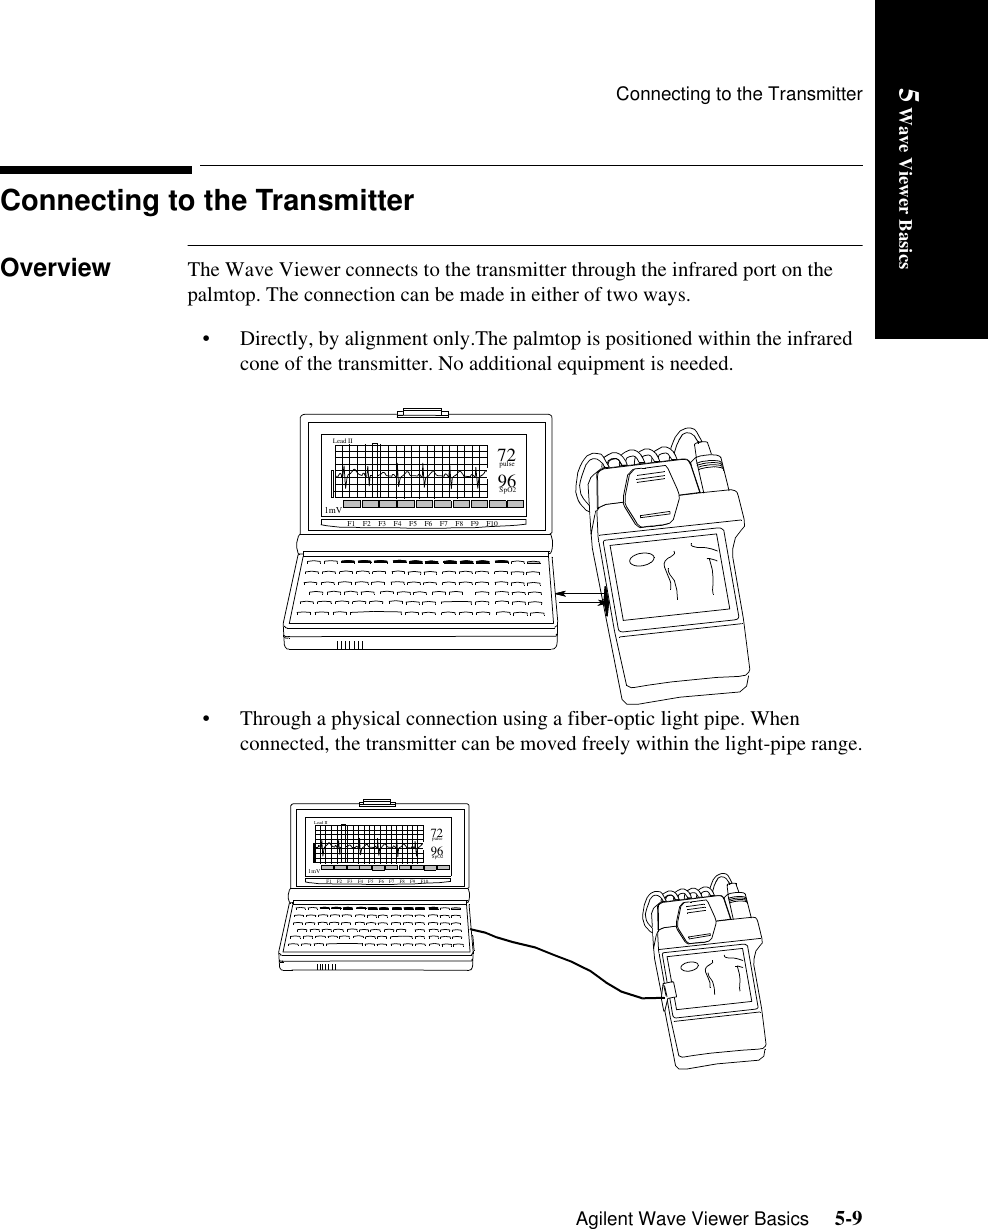 Connecting to the TransmitterAgilent Wave Viewer Basics     5-95 Wave Viewer BasicsConnecting to the TransmitterOverview The Wave Viewer connects to the transmitter through the infrared port on the palmtop. The connection can be made in either of two ways. • Directly, by alignment only.The palmtop is positioned within the infrared cone of the transmitter. No additional equipment is needed. • Through a physical connection using a fiber-optic light pipe. When connected, the transmitter can be moved freely within the light-pipe range.EstimateHRSystemSetupSystemInfoSpO2QualitySpO2NumbersECGScreenHelpMenu7296pulseSpO2Lead II1mVF1    F2    F3    F4    F5    F6    F7    F8    F9    F10EstimateHRSystemSetupSystemInfoSpO2QualitySpO2NumbersECGScreenHelpMenu7296pulseSpO2Lead II1mVF1    F2    F3    F4    F5    F6    F7    F8    F9    F10